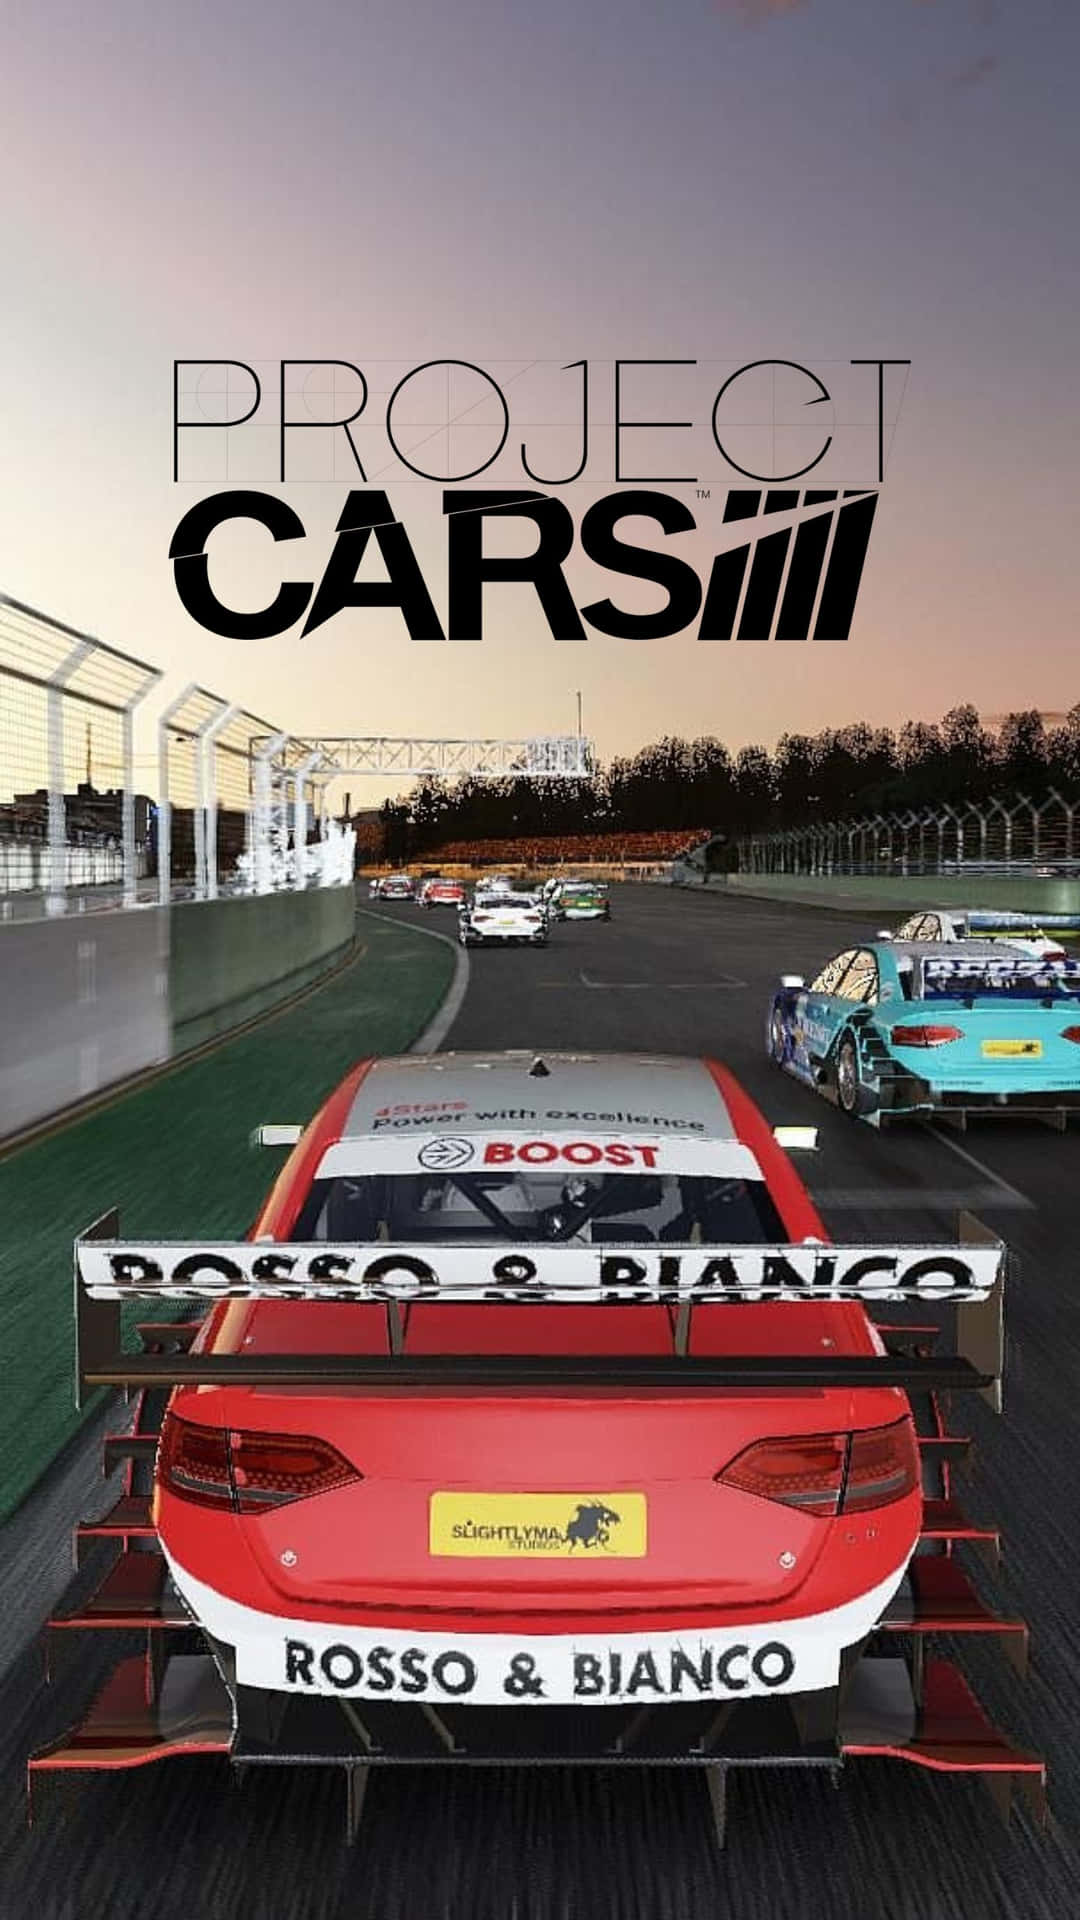 "Experience the Power of Android with Project Cars"